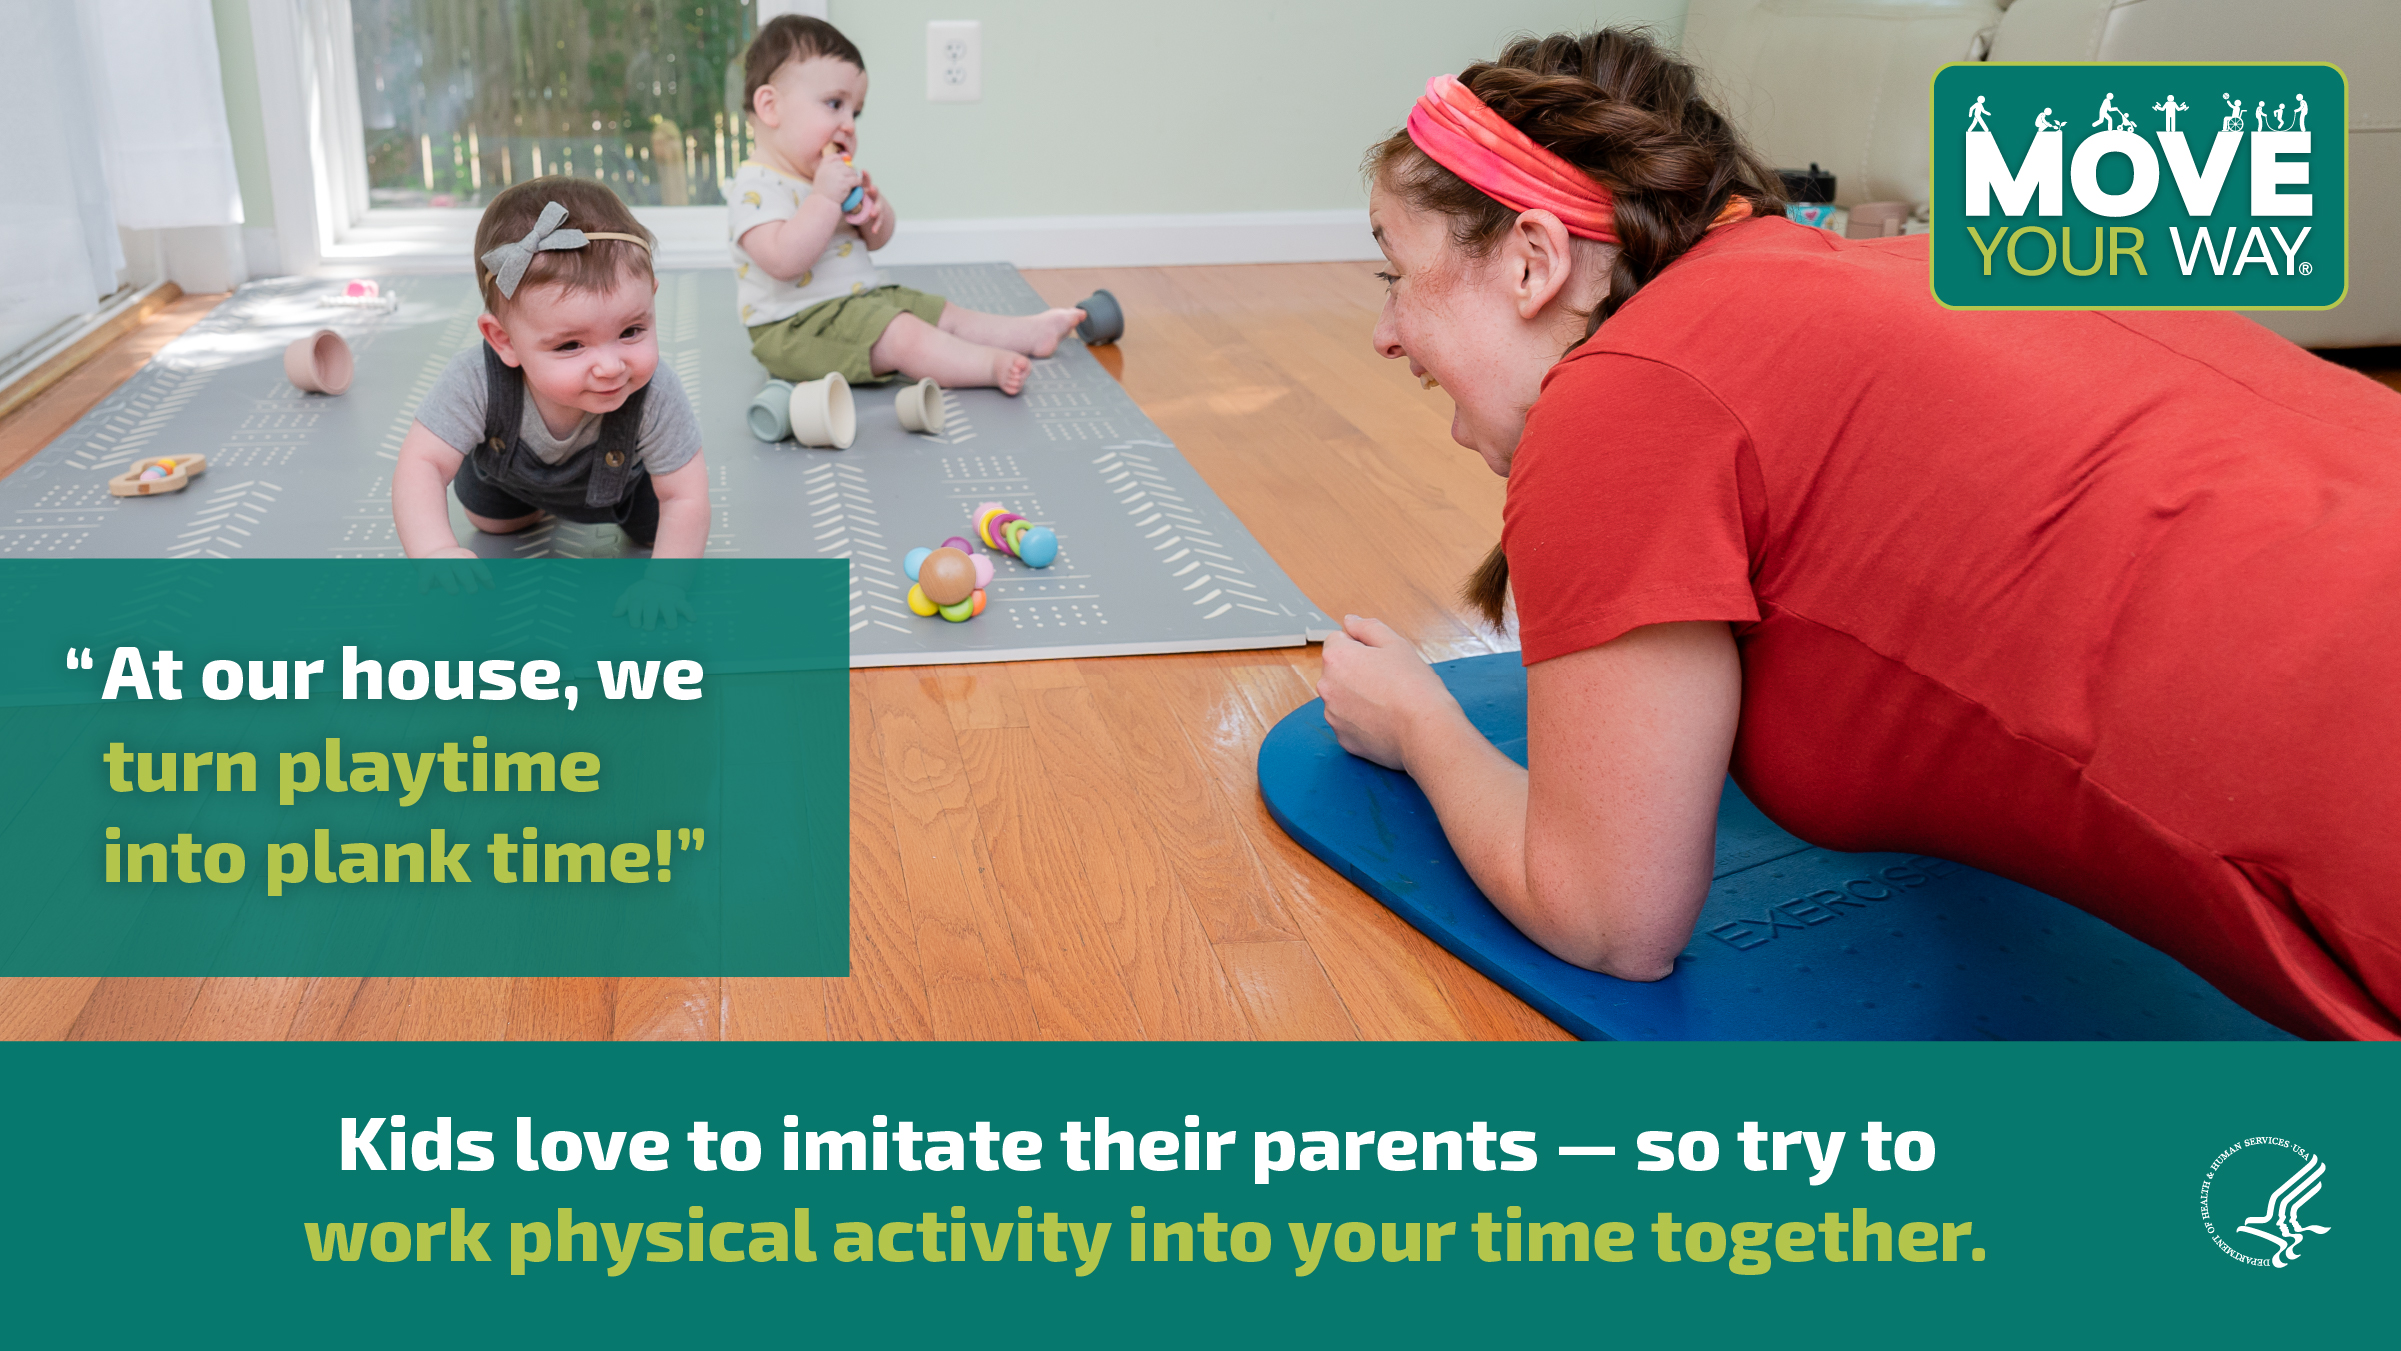 A young white mother is propped up on her forearms in the plank position on her living room floor. She’s smiling at her twin babies, who are playing with toys on a playmat in front of her. The image also shows the Move Your Way logo and the following messages: "At our house, we turn playtime into plank time!" and "Kids love to imitate their parents — so try working physical activity into your time together."